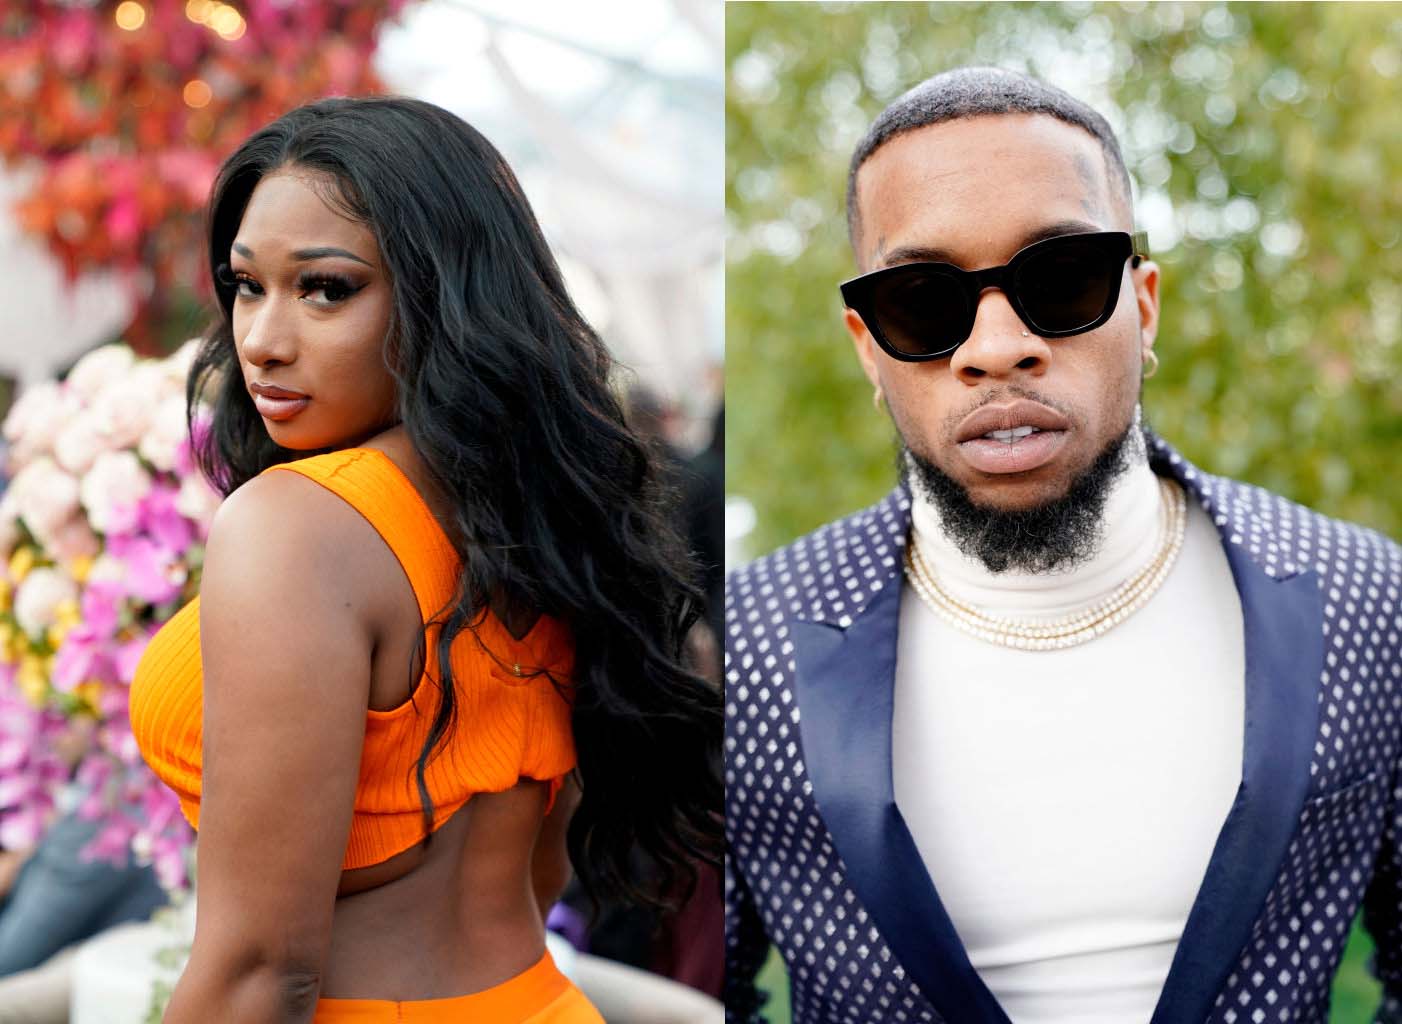 Tory Lanez To Face Court A Year After Allegedly Shooting Megan Thee Stallion? New Information Regarding Rapper’s Felony Assault Case Explored